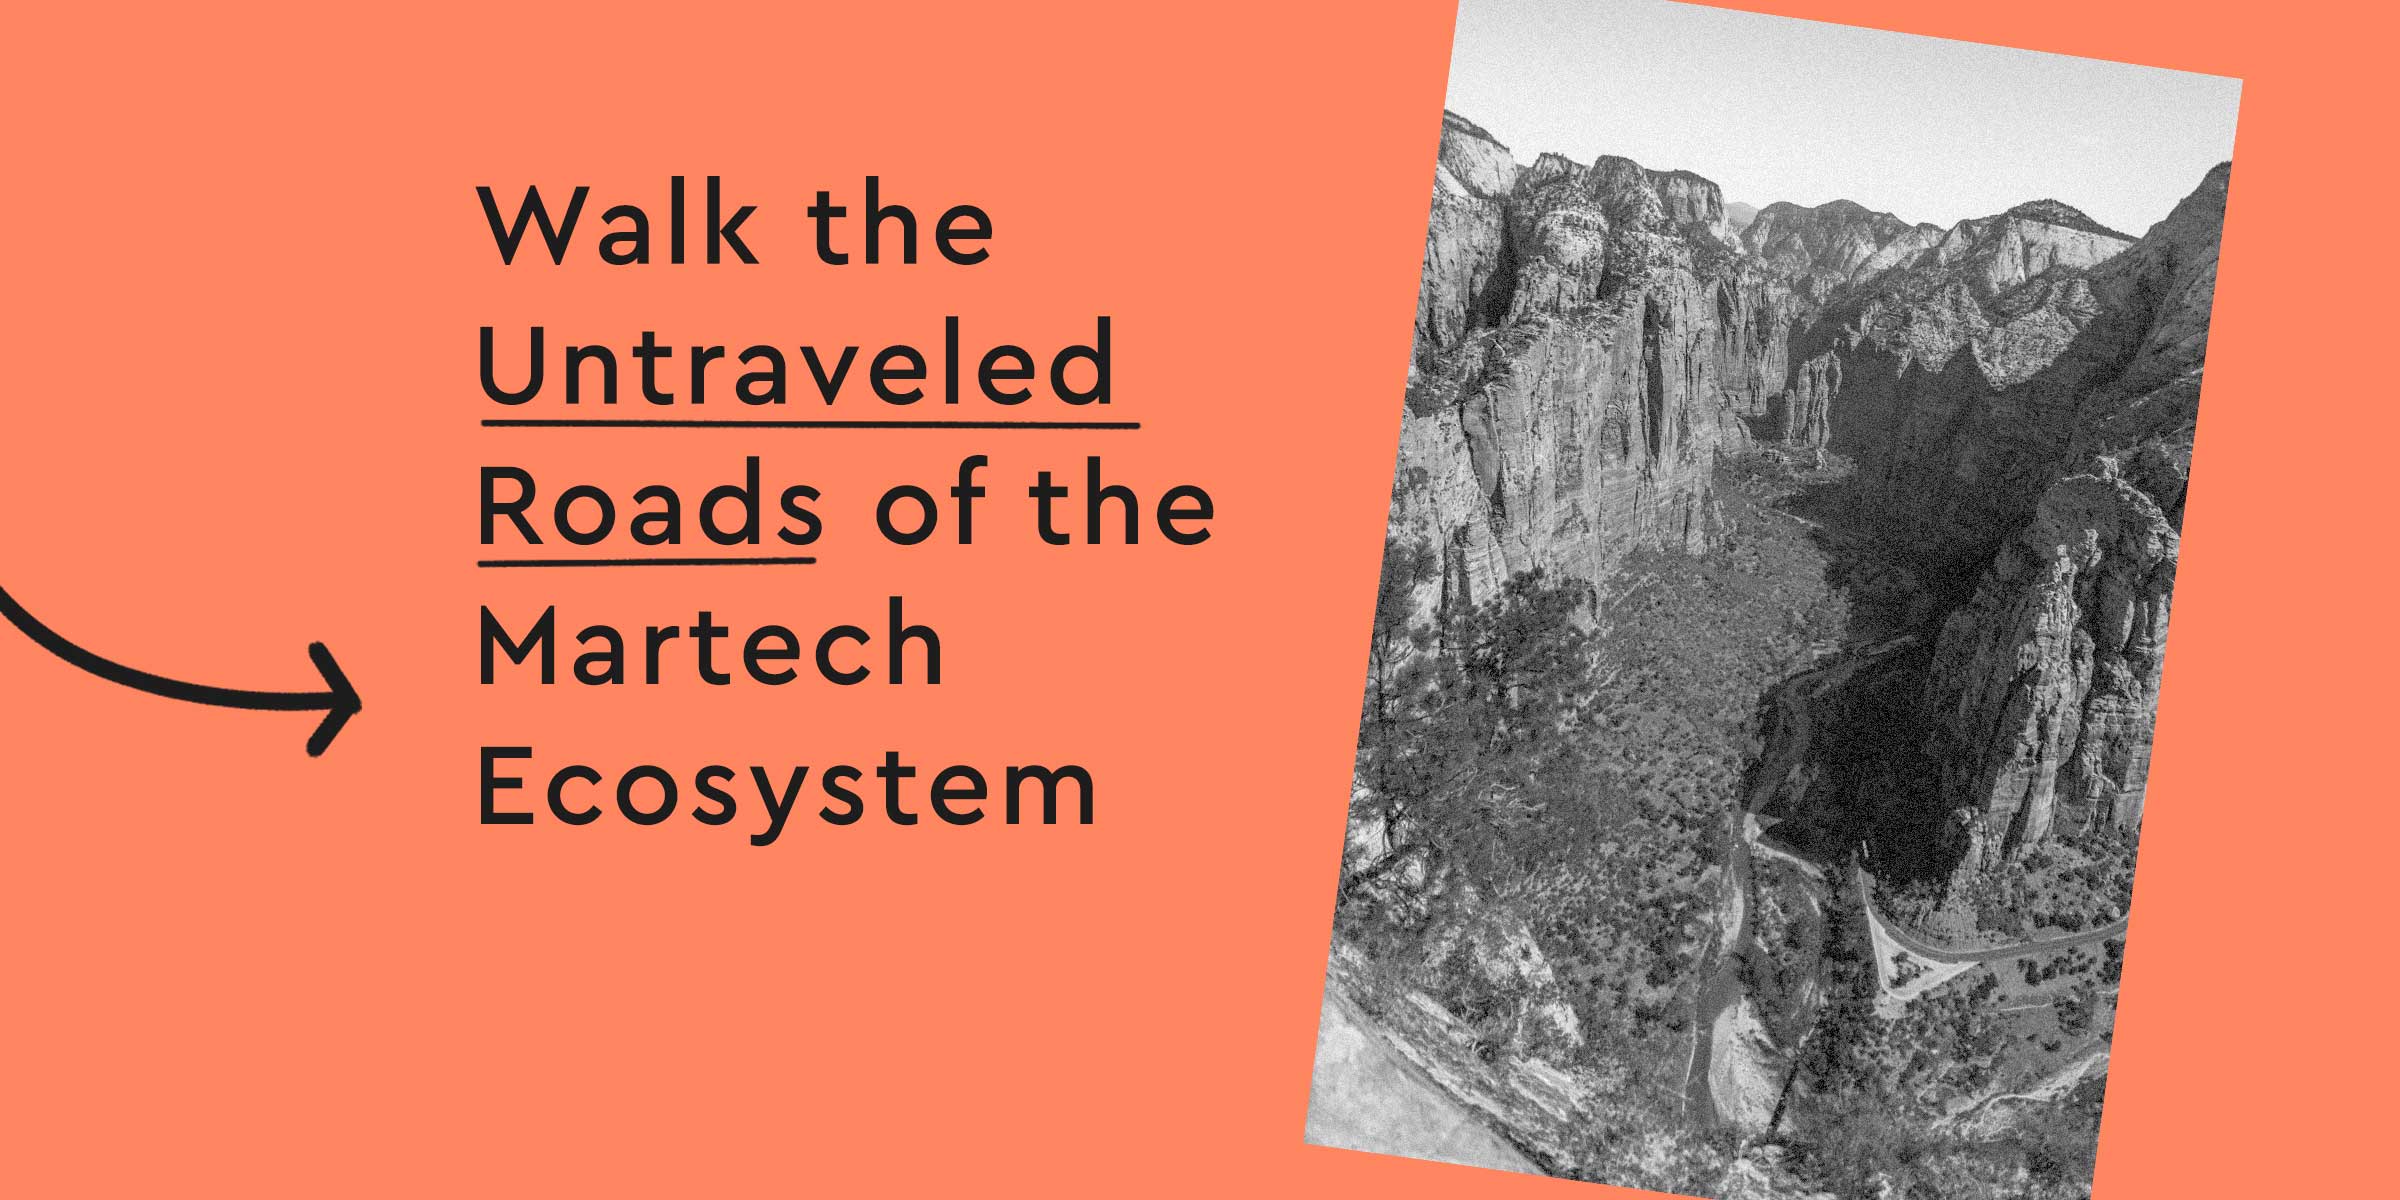 Avoid the Stackpocalypse: Walk the Untraveled Roads of the Martech Ecosystem